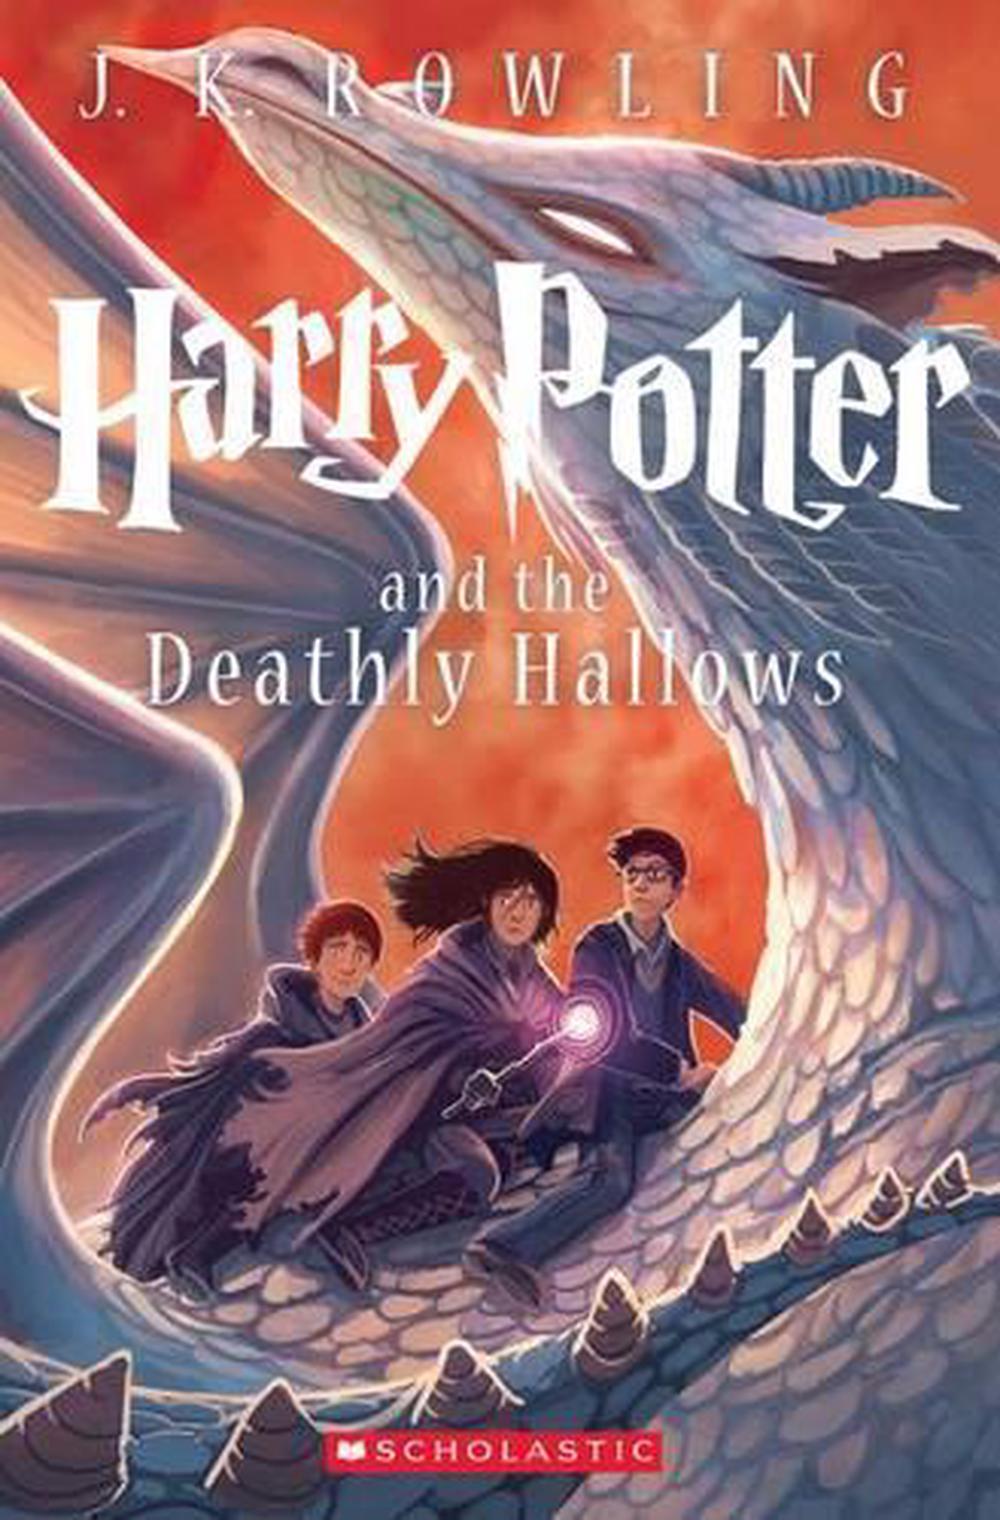 harry potter and the deathly hallows full audiobook download